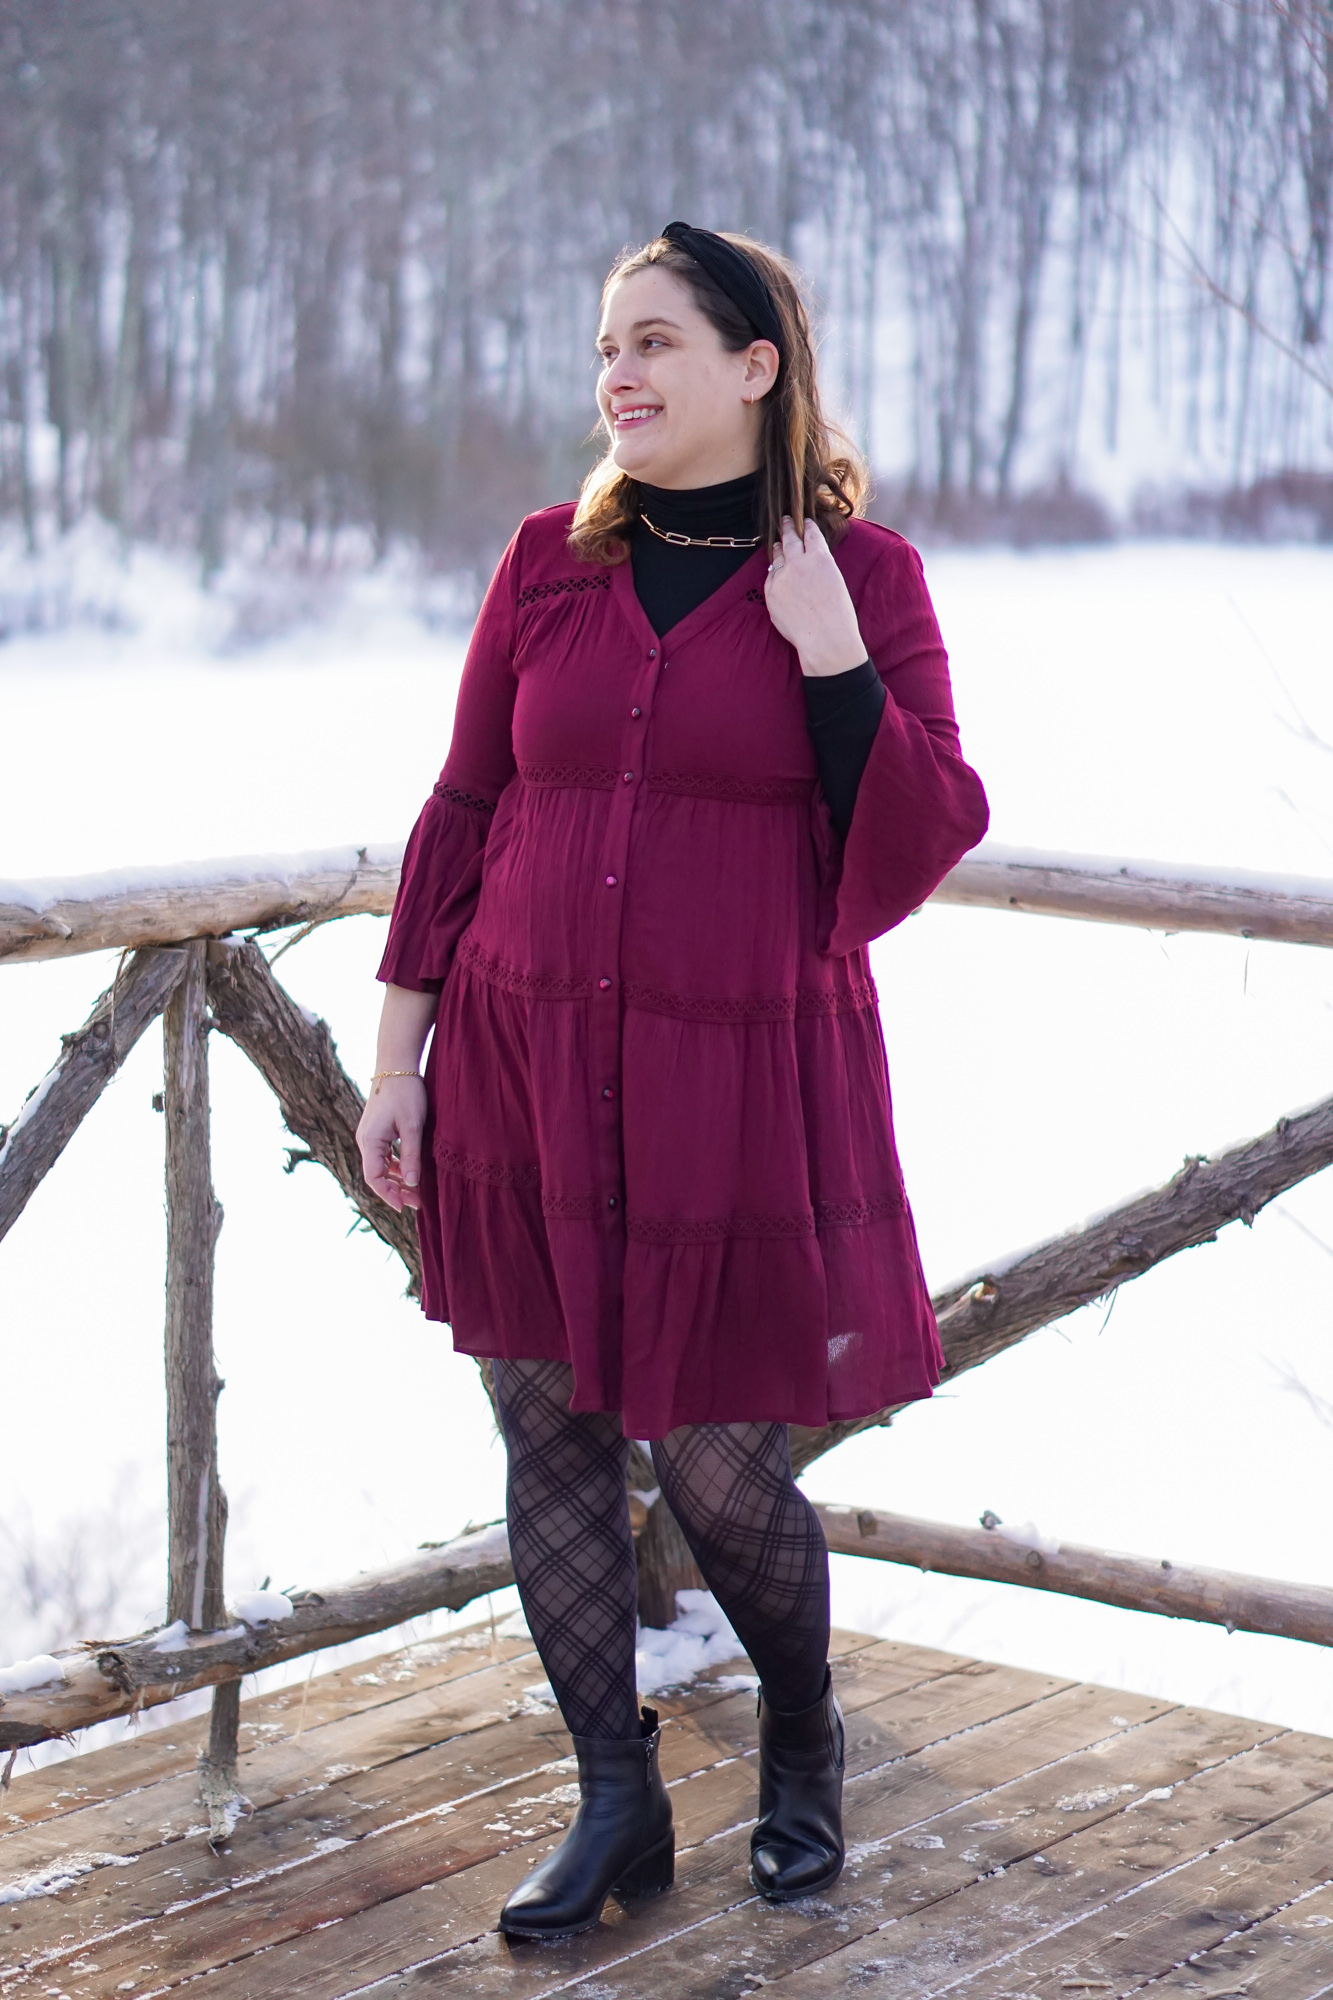 How to style a short dress for winter